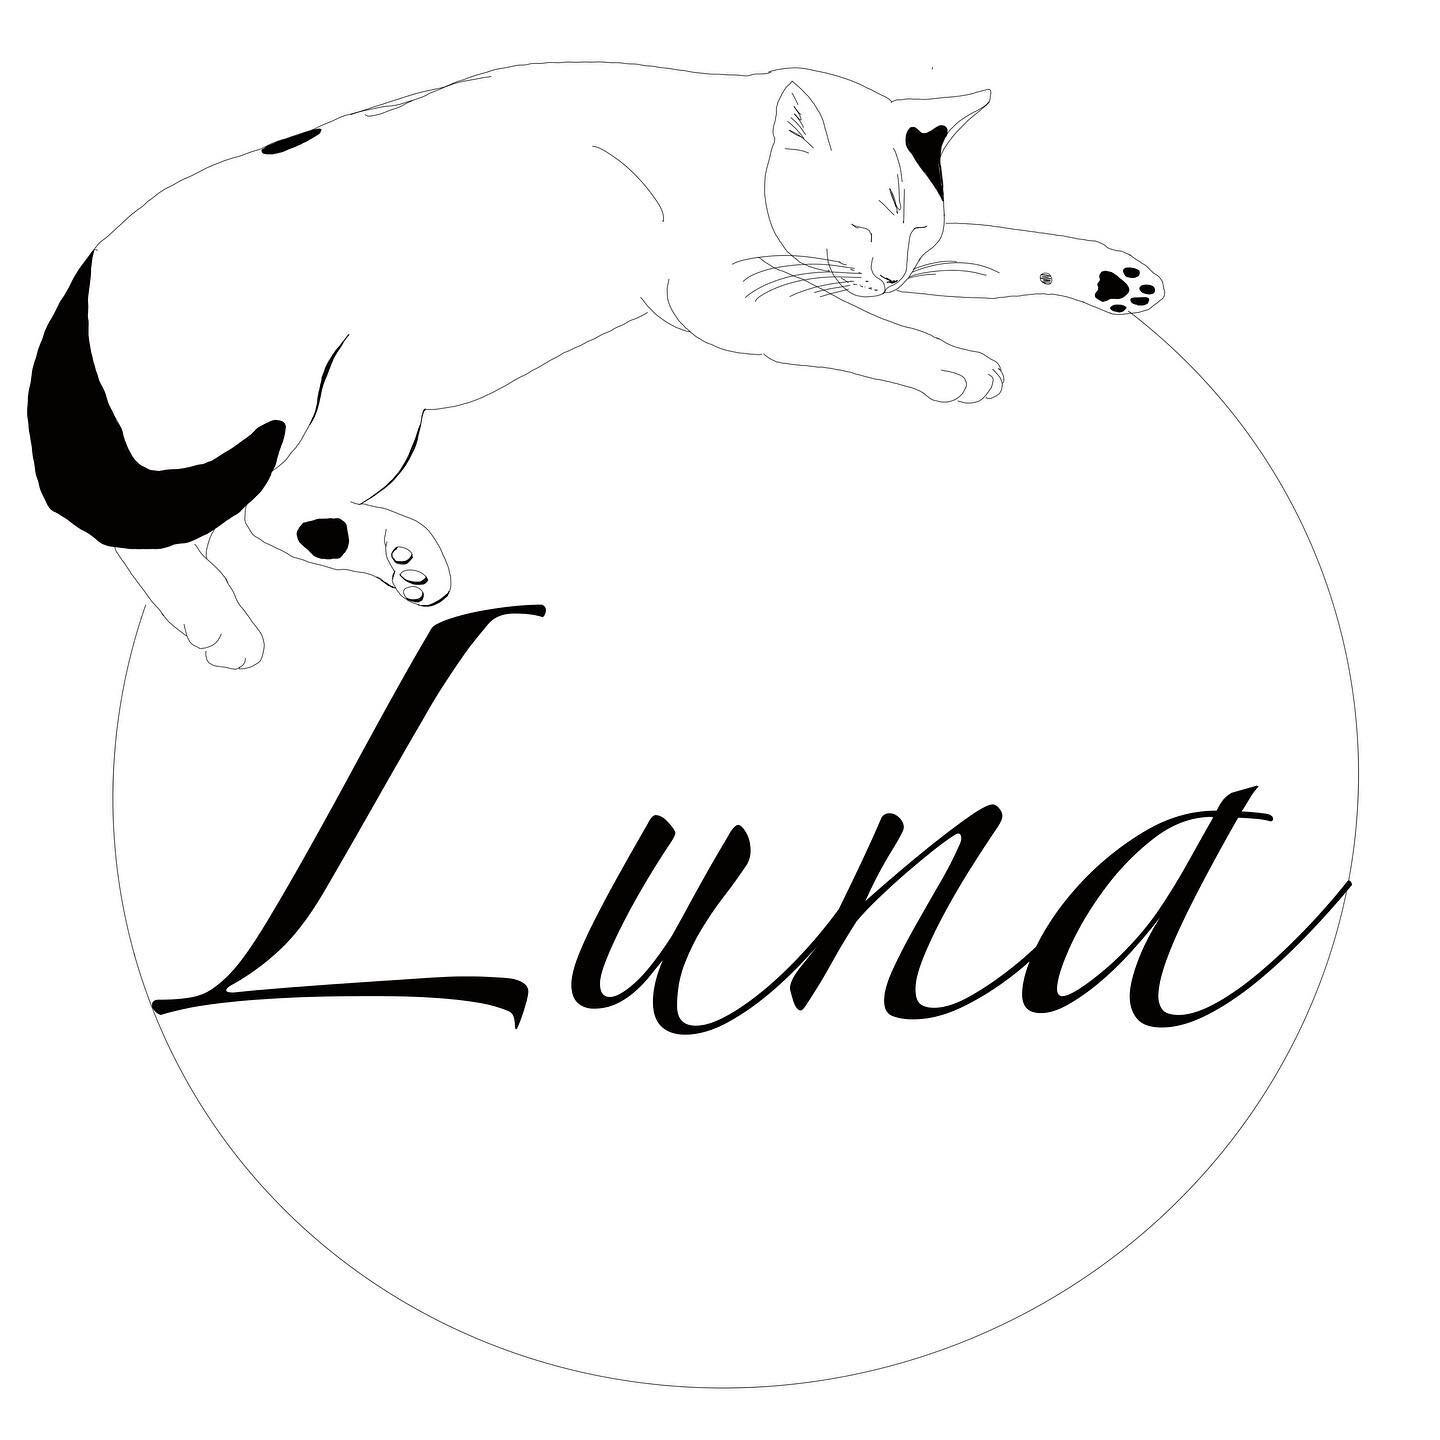 My friend&rsquo;s cat recently left this world so I made her this little sketch for her. In the past I&rsquo;ve made personalized tattoo designs, or custom pieces to be printed with other online services. It&rsquo;s fun to see my work on a mousepad o